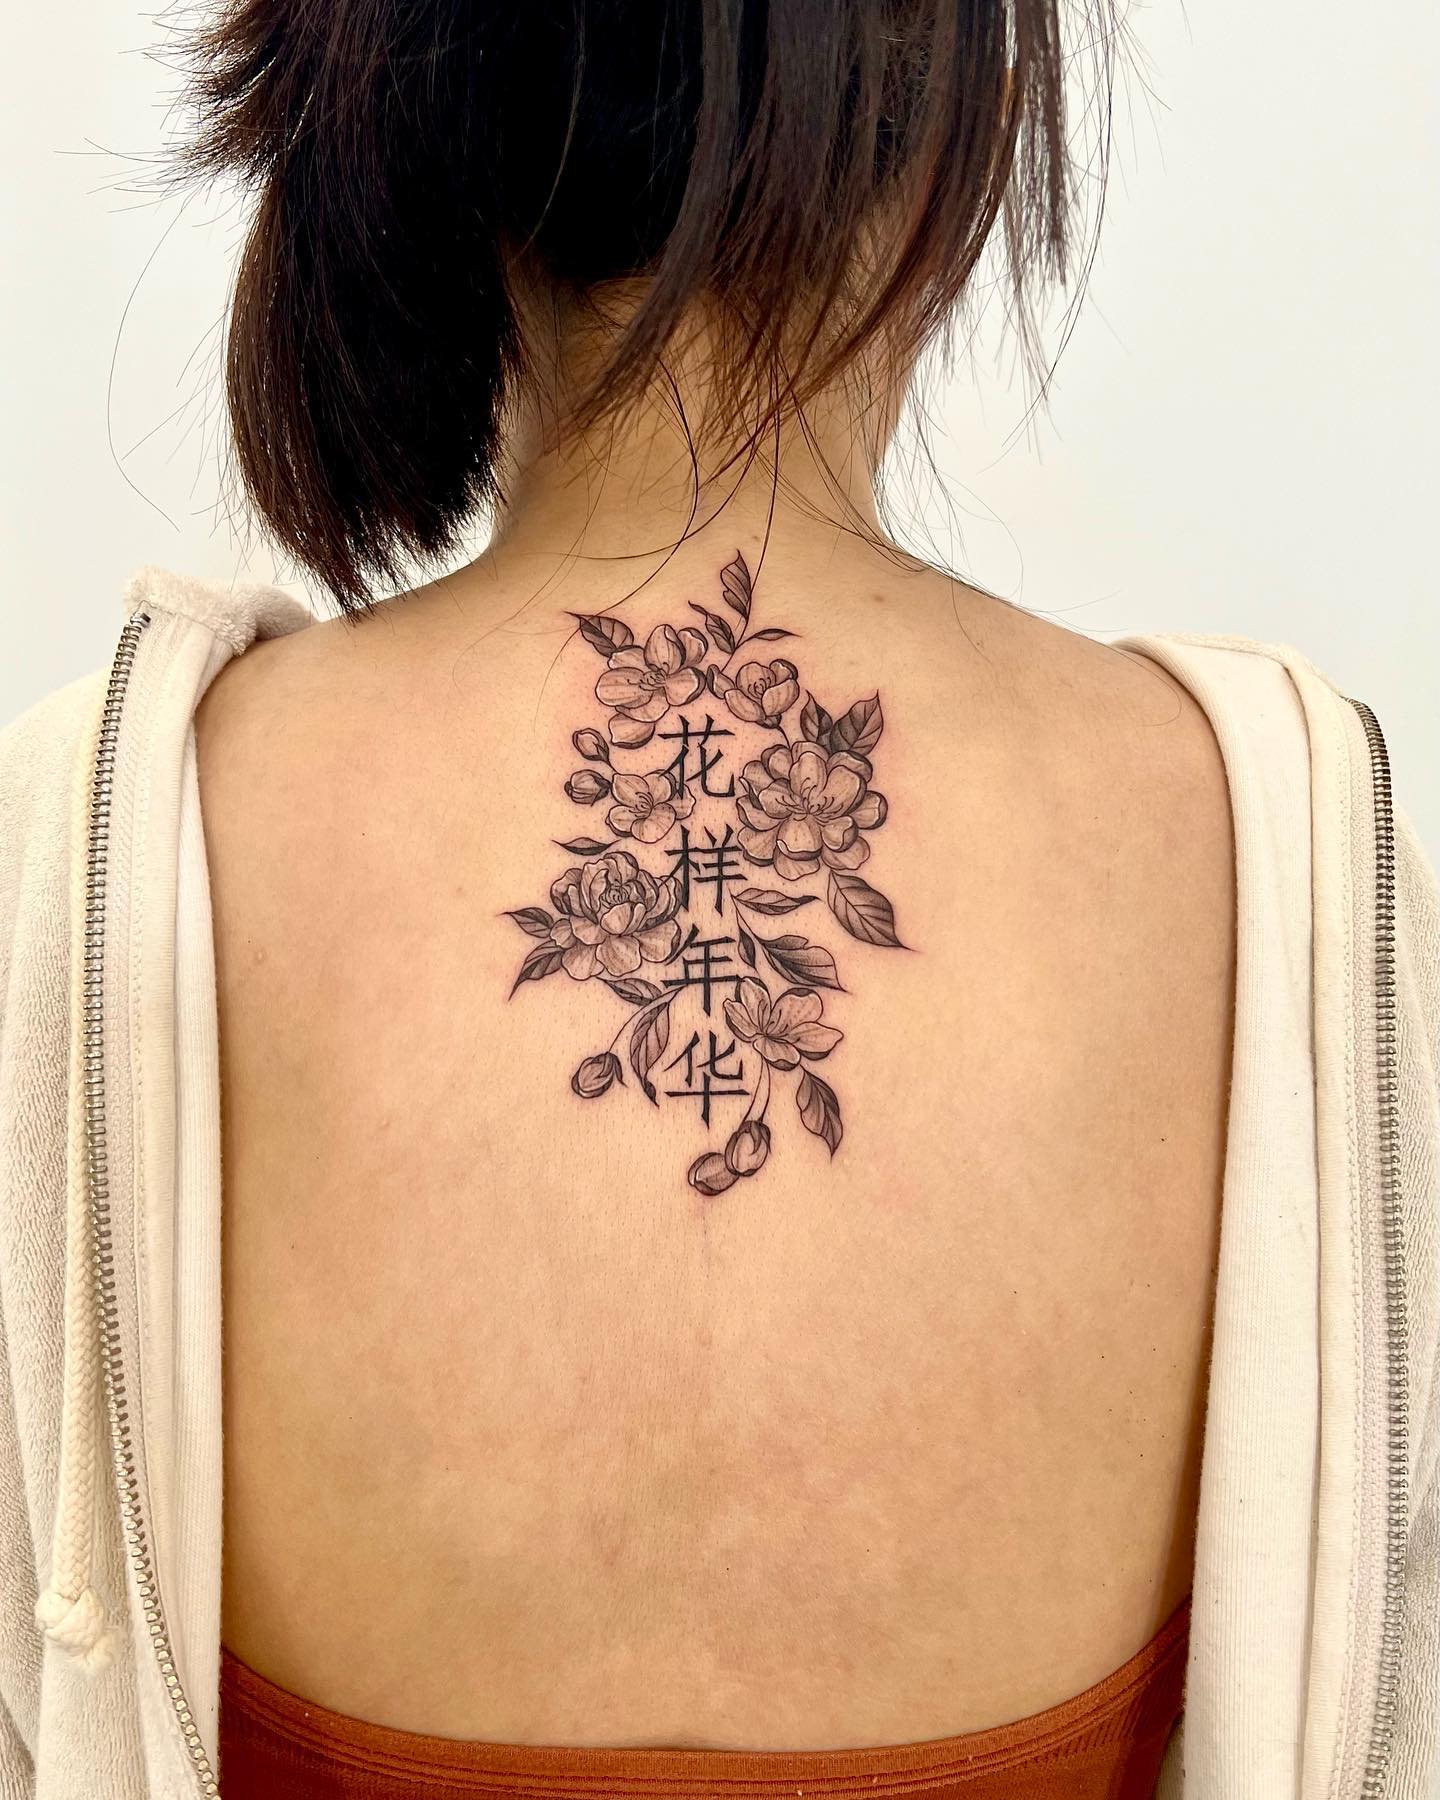 A giant flower tattoo with Chinese lettering is for women who want something sweet, only known to them and that others can’t decipher as easily.